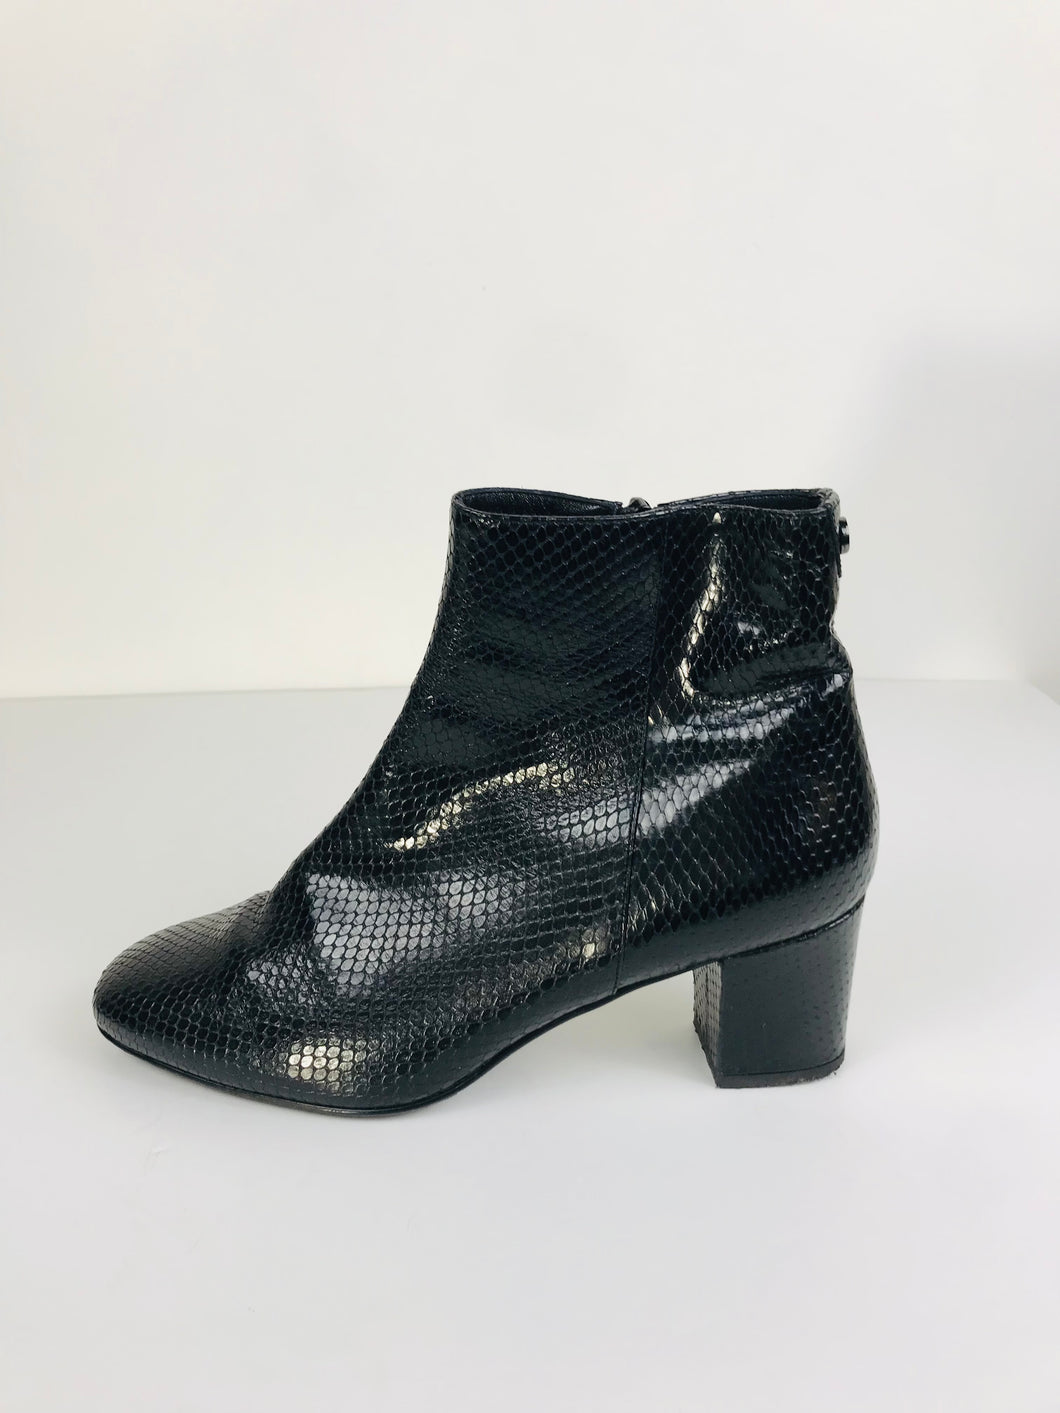 Russell & Bromley Women's Patent Leather Heeled Snakeskin Boots | 40 UK7 | Black